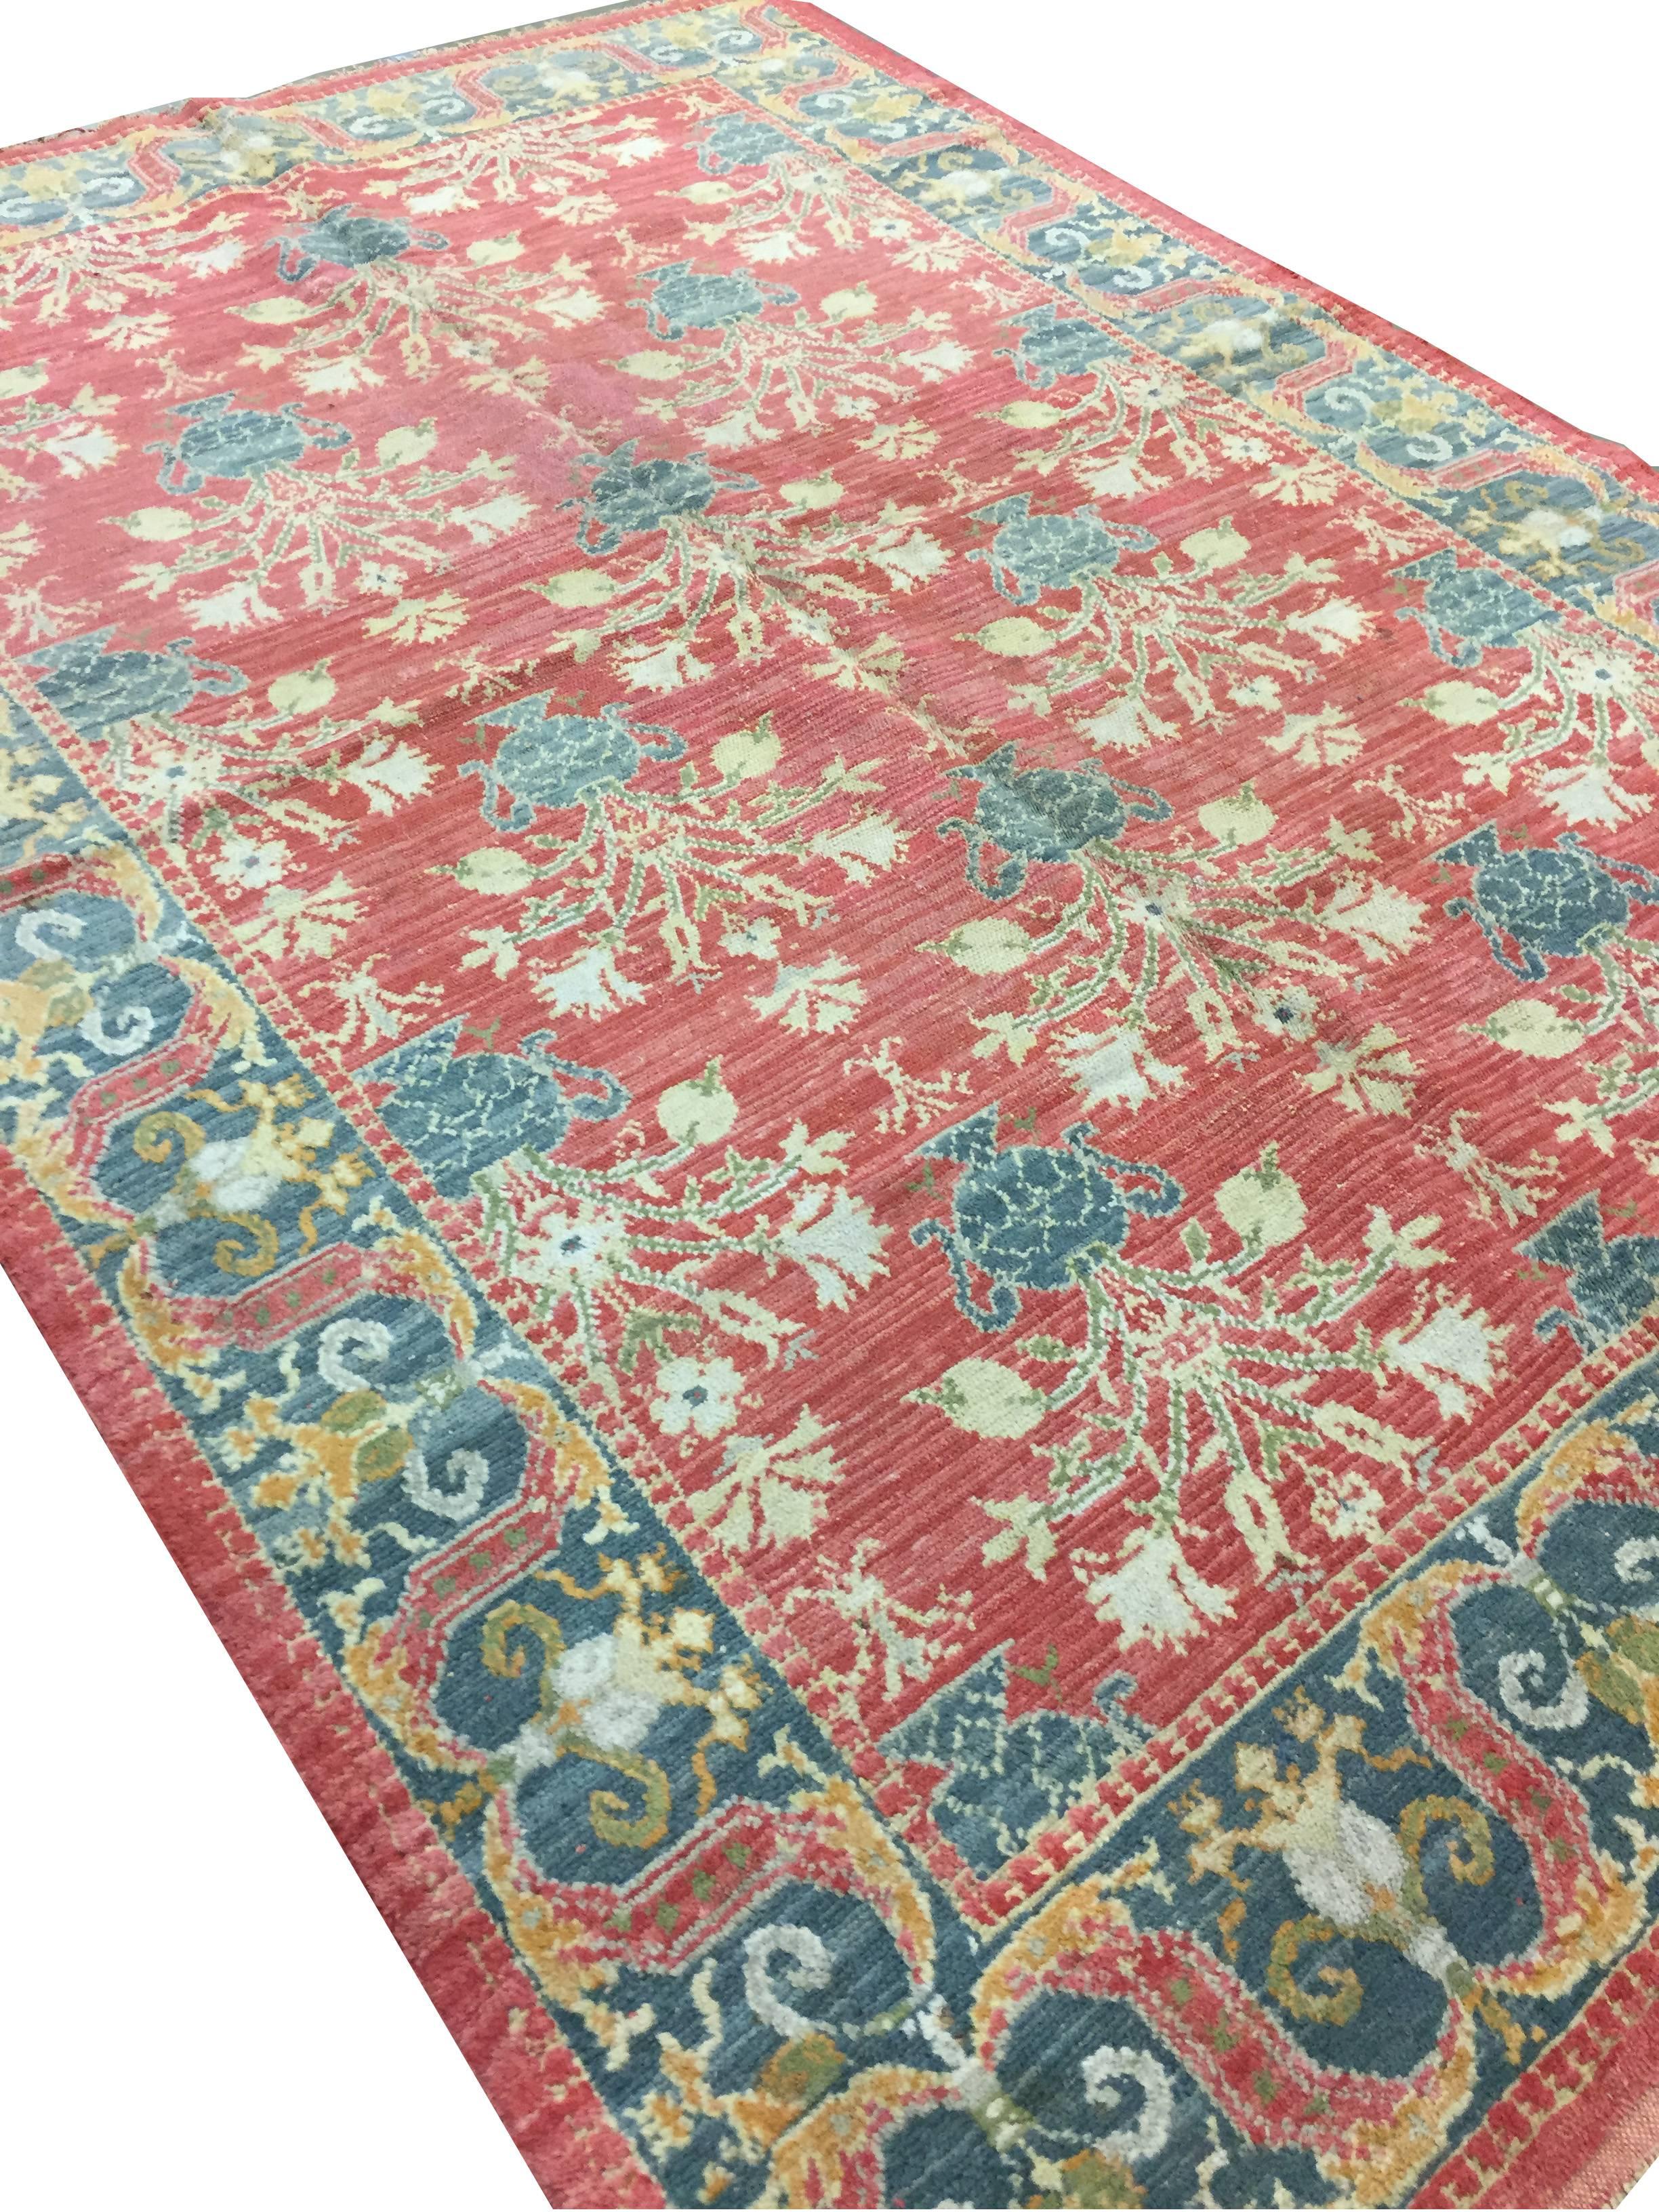 Vintage Spanish Rug, circa 1940, 5' x 7'4 In Good Condition For Sale In New York, NY